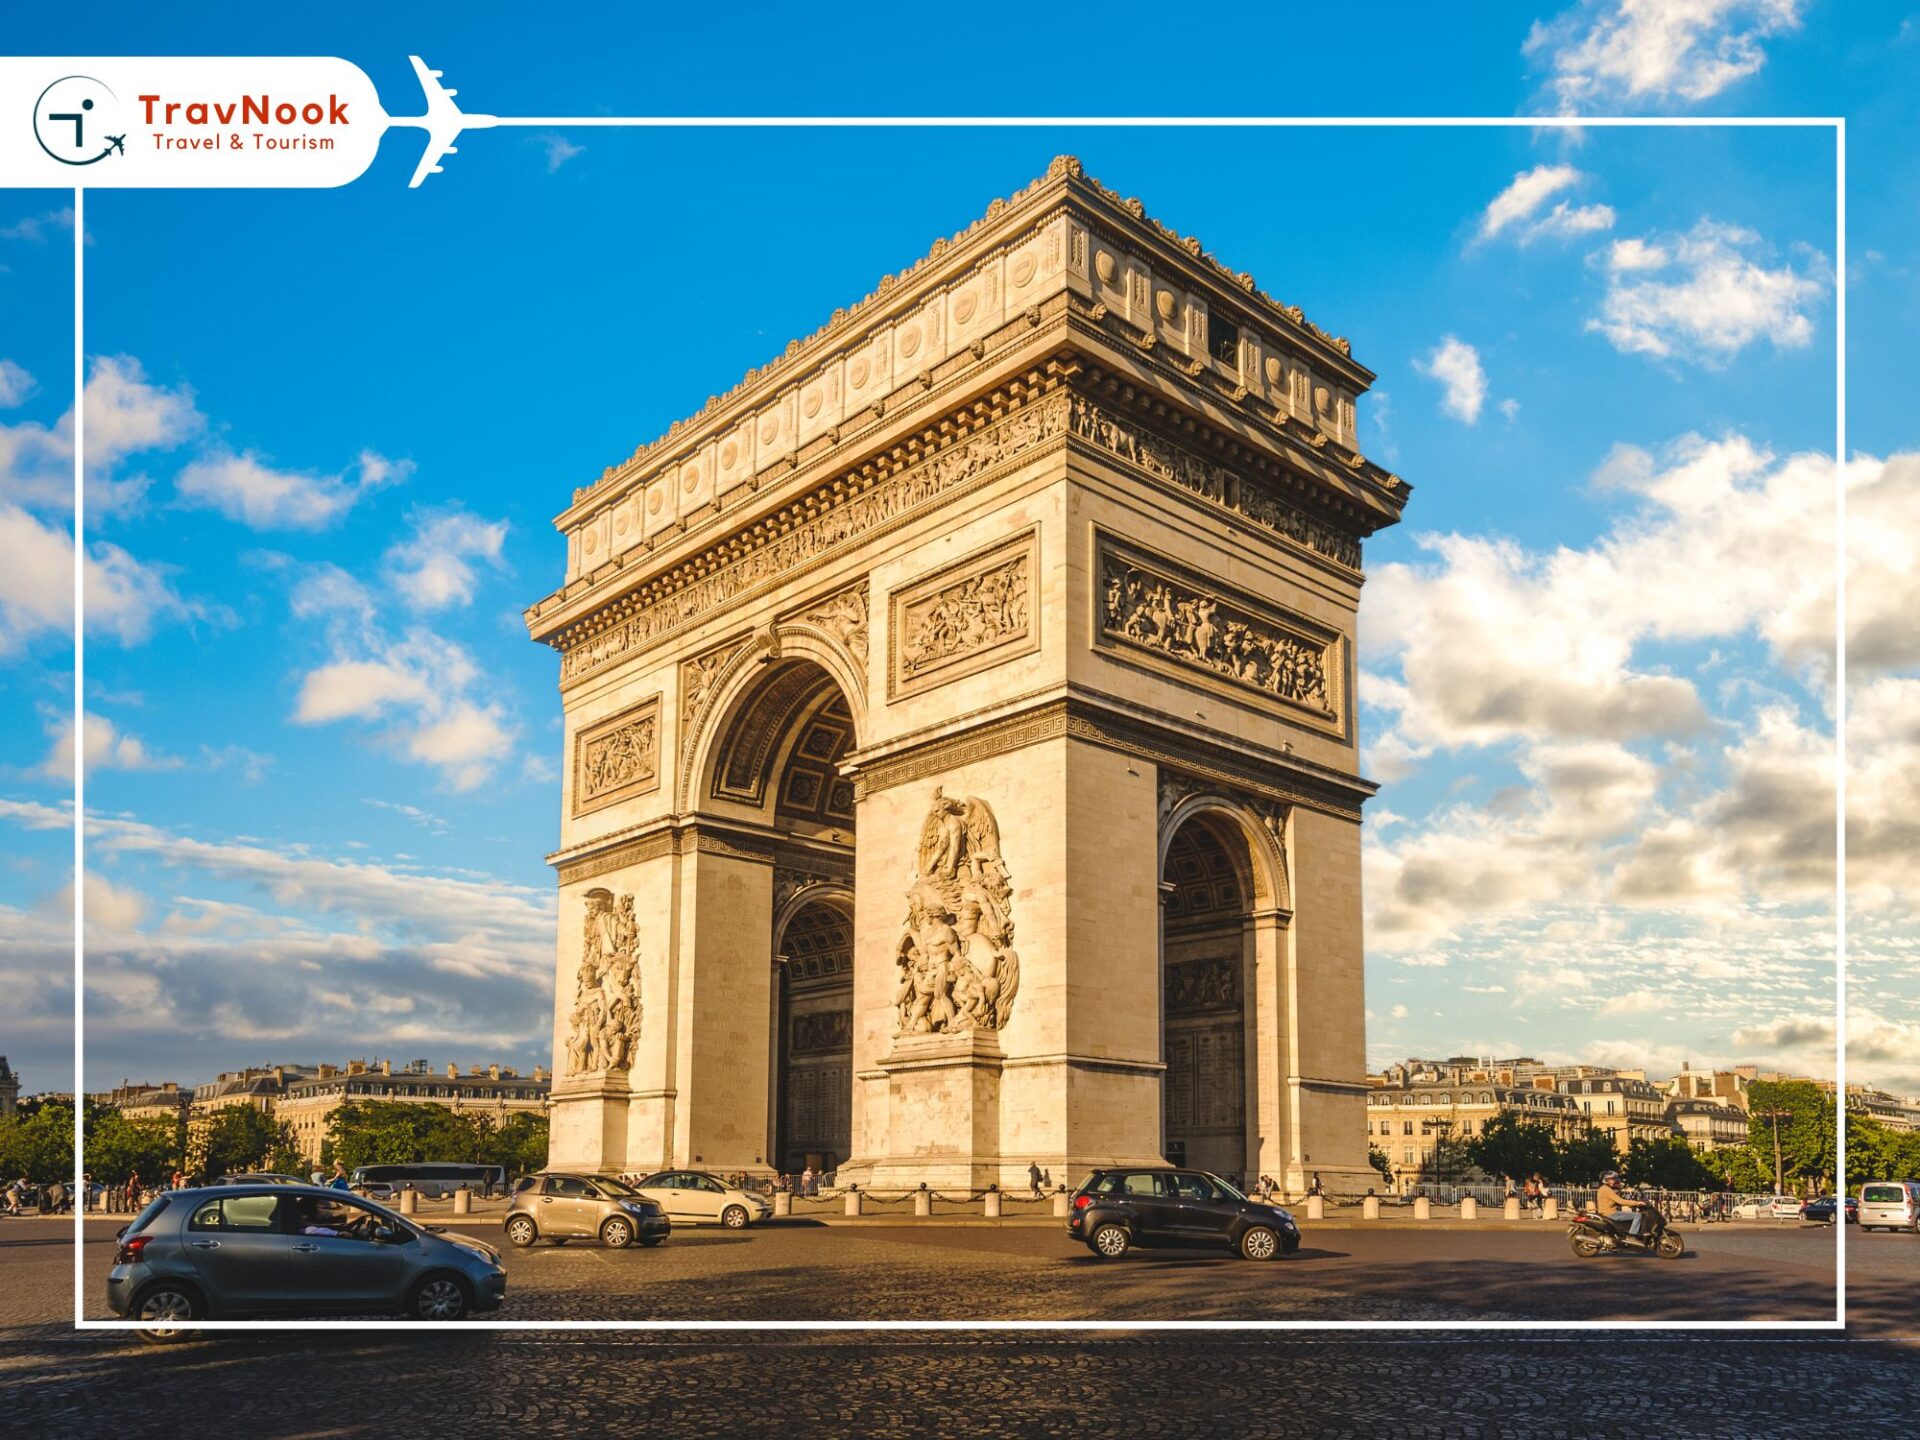 Famous Landmarks in France to Visit From UAE - Arc De Triomphe